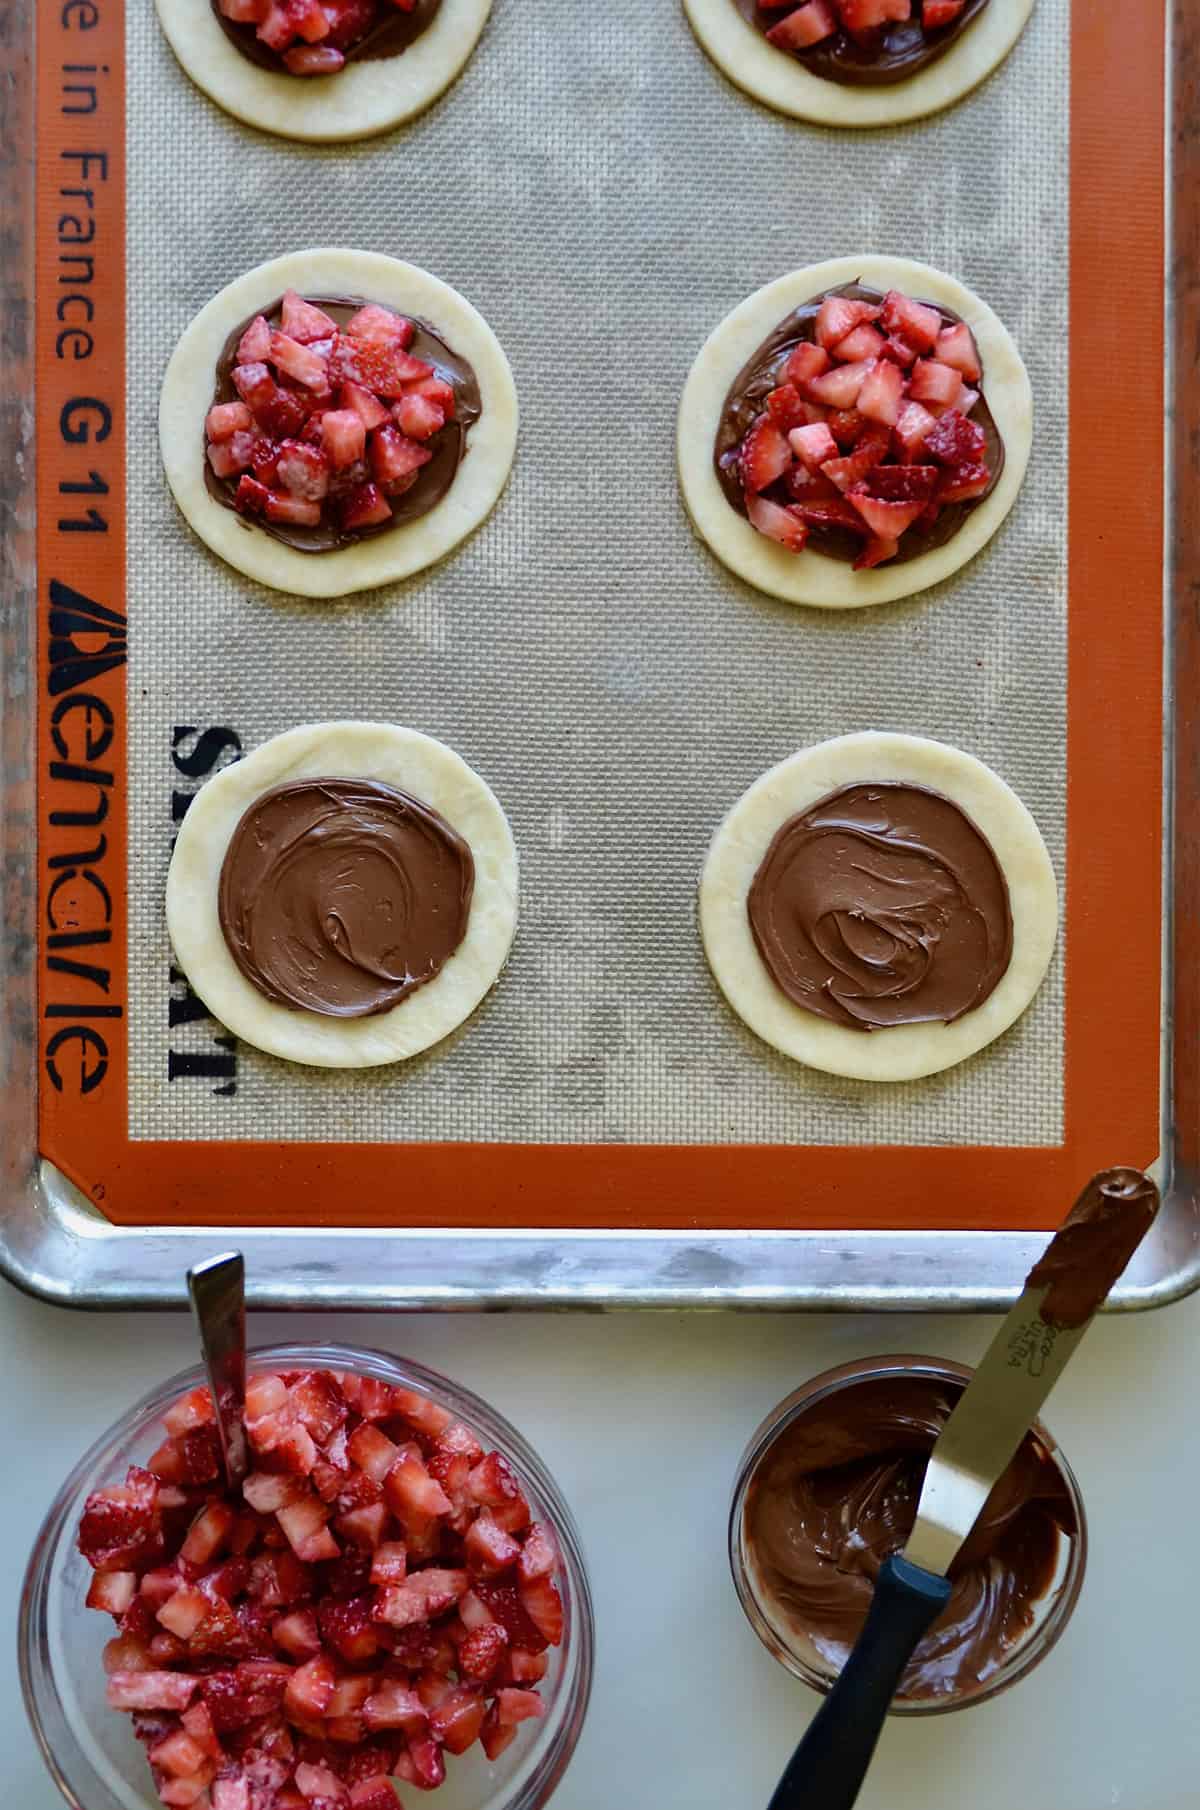 Rounds of pie dough are being filled with Nutella and strawberries. Small glass bowls with diced strawberries and Nutella sit nearby.